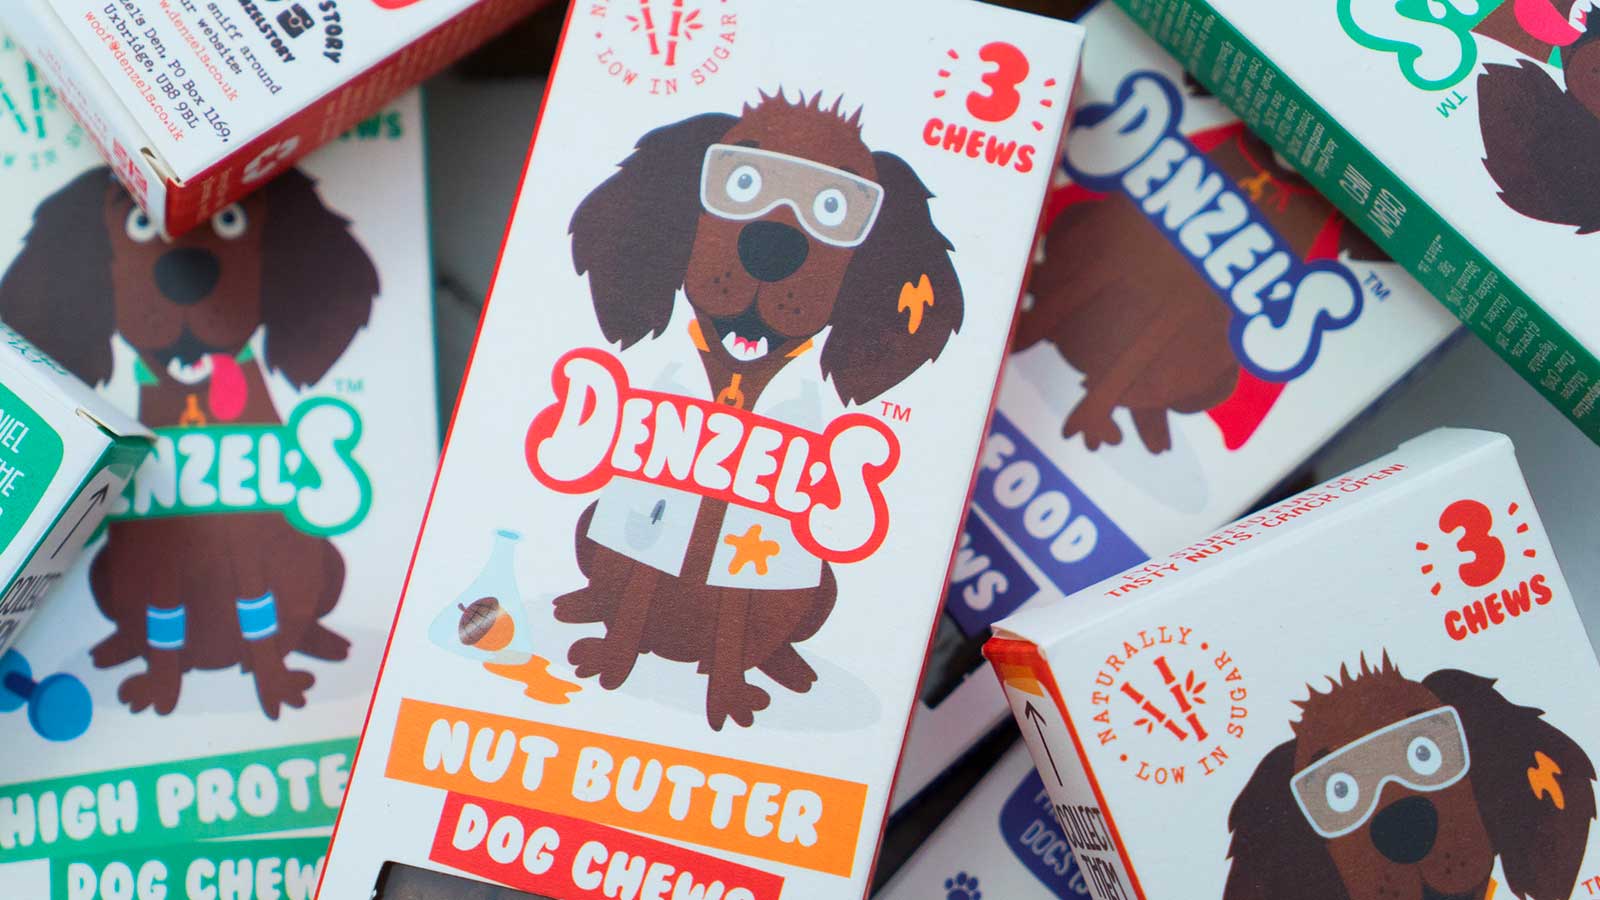 Boxes of Denzel's Dog Treats and Chews